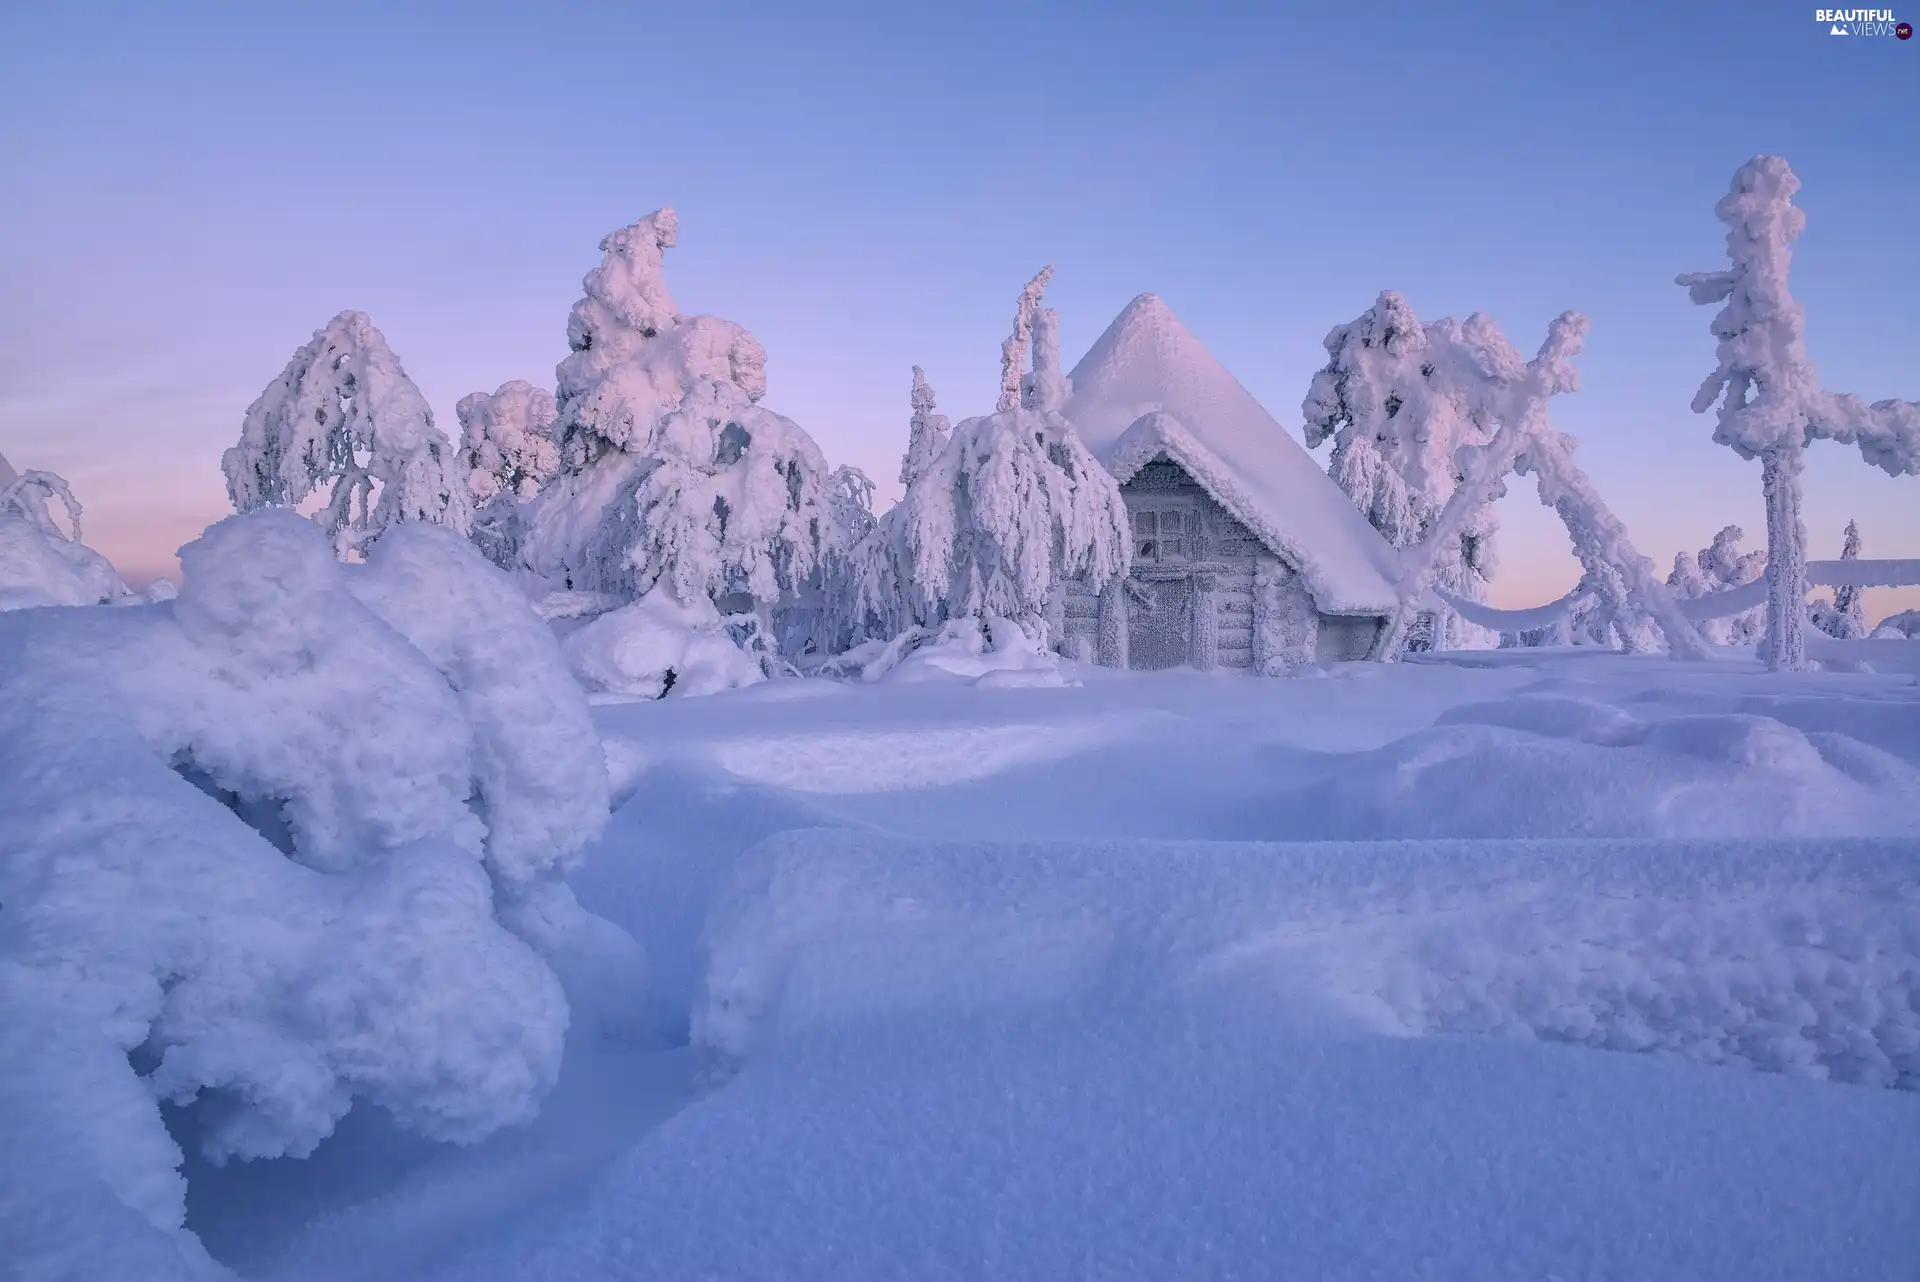 viewes, winter, Lapland, Finland, house, trees